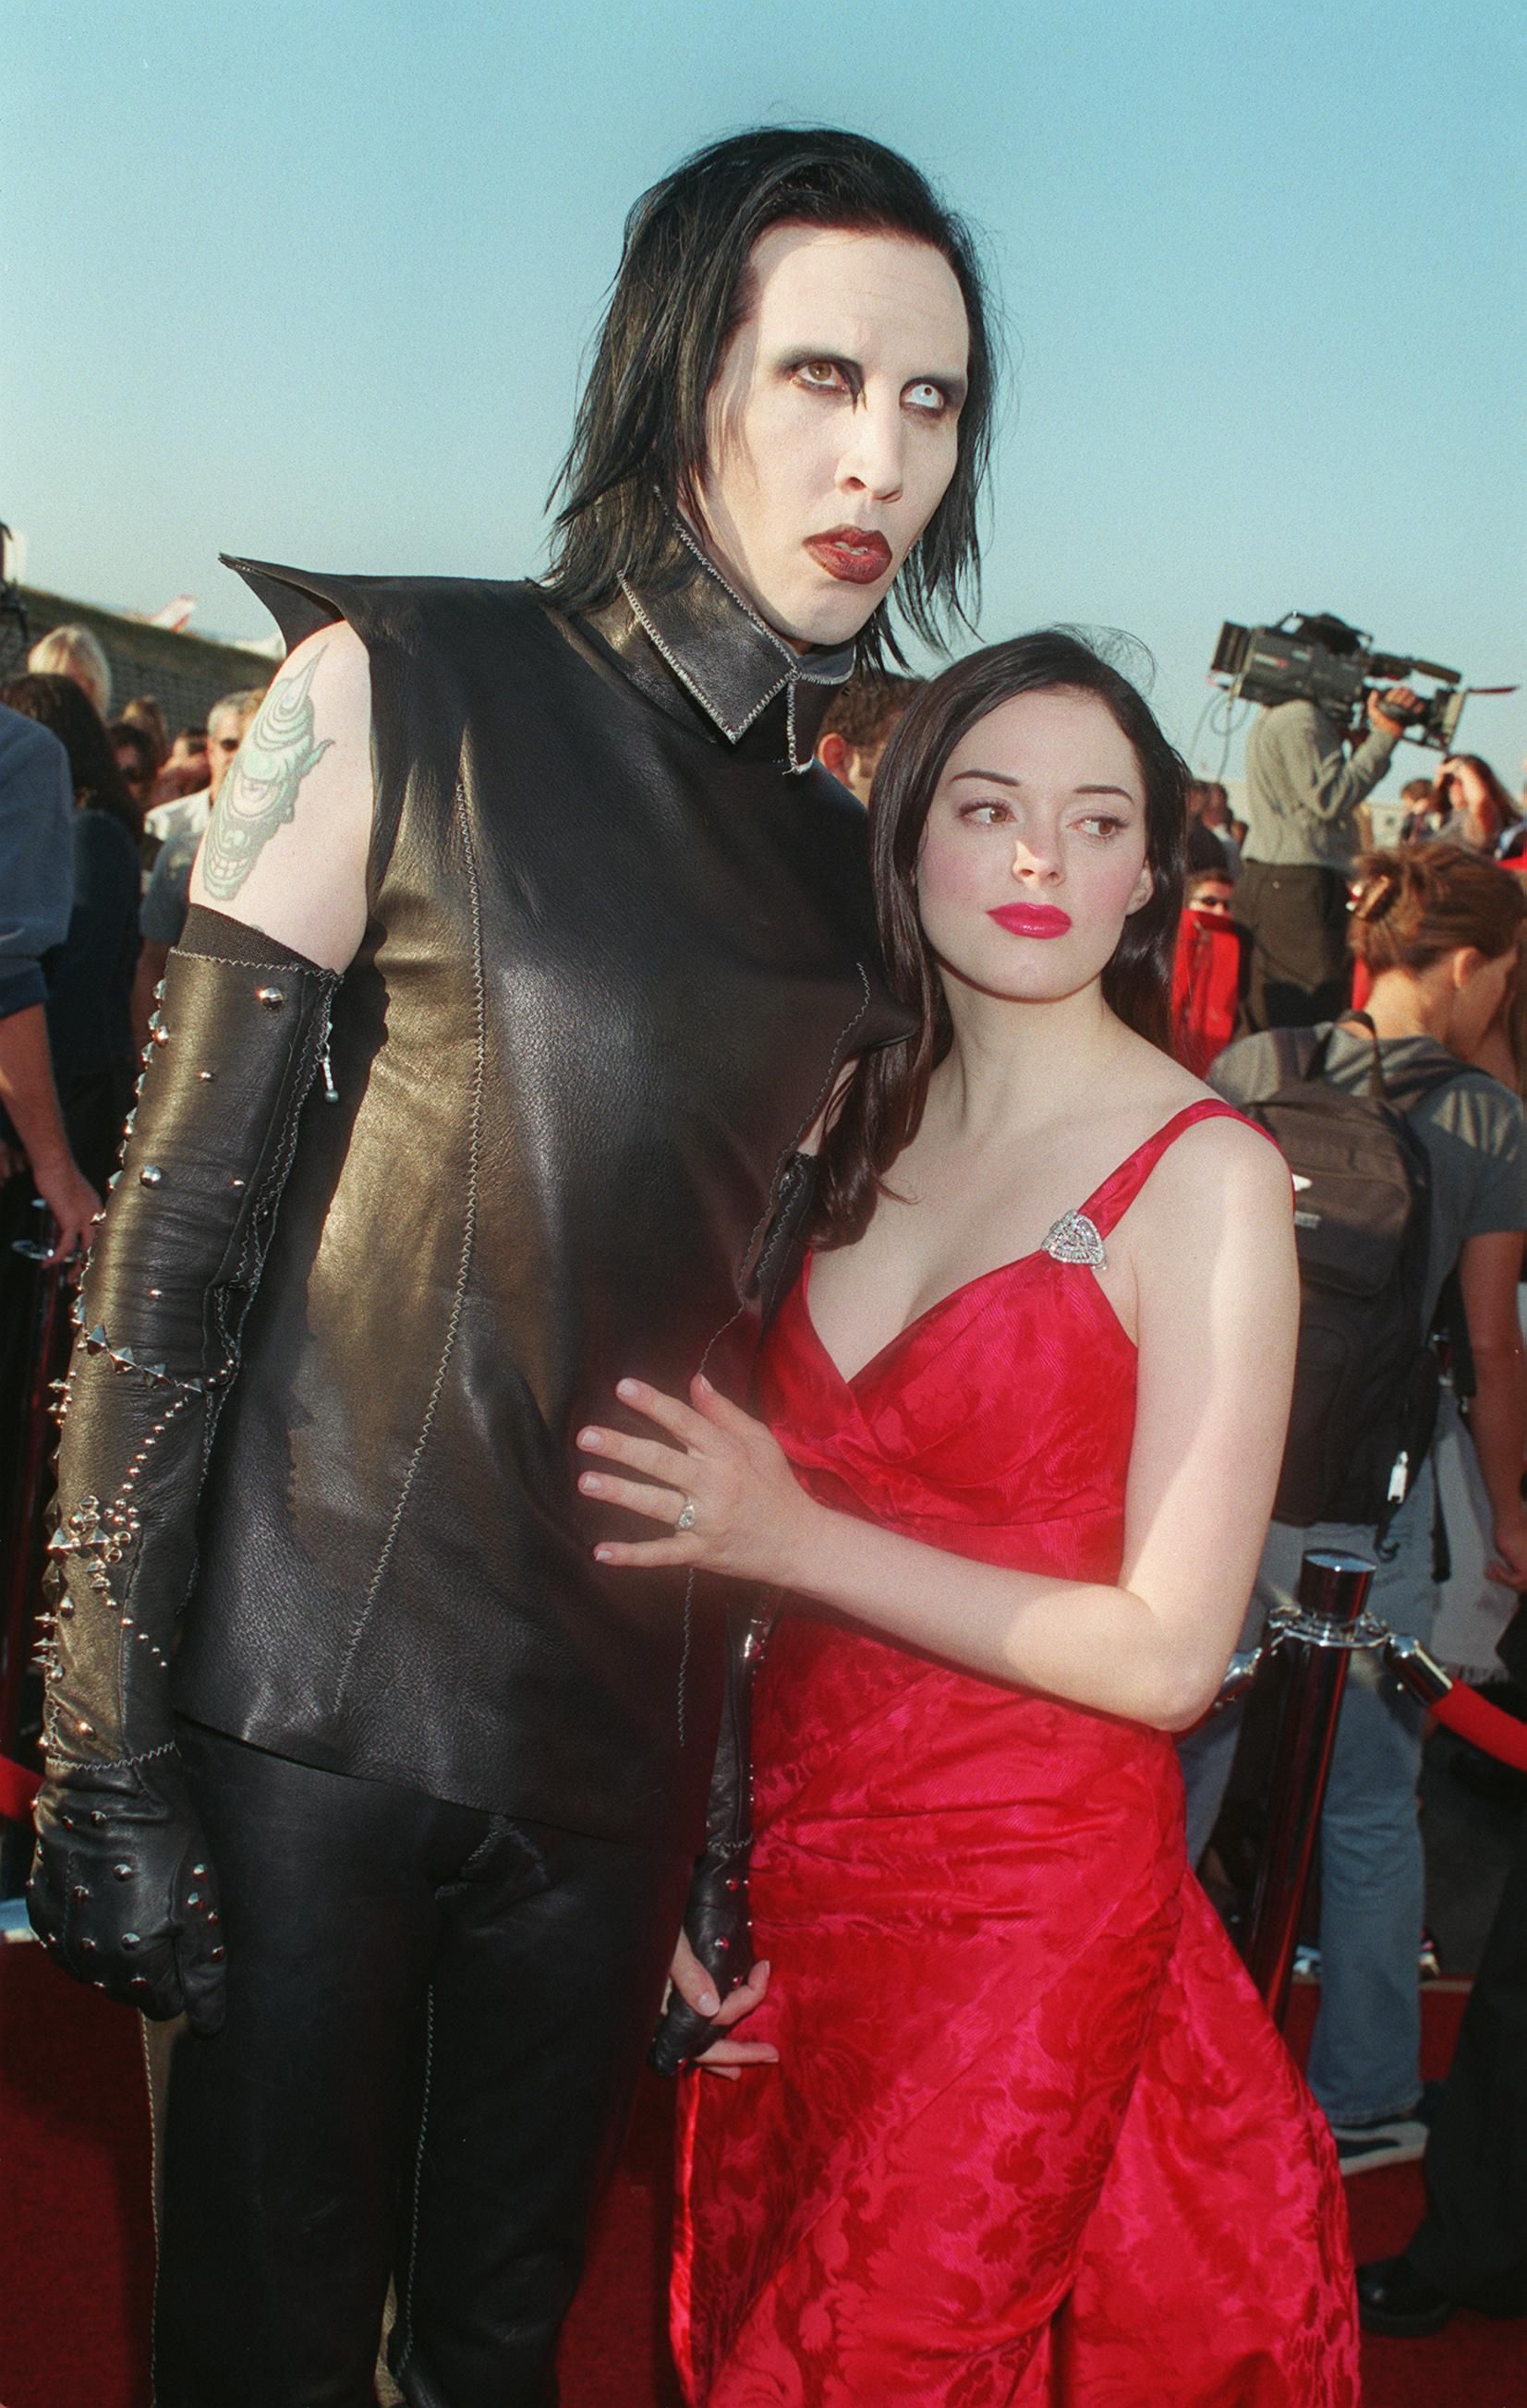  Marilyn Manson and Rose McGowan at the 1999 MTV Movie Awards in Santa Monica, California | Source: Getty Images